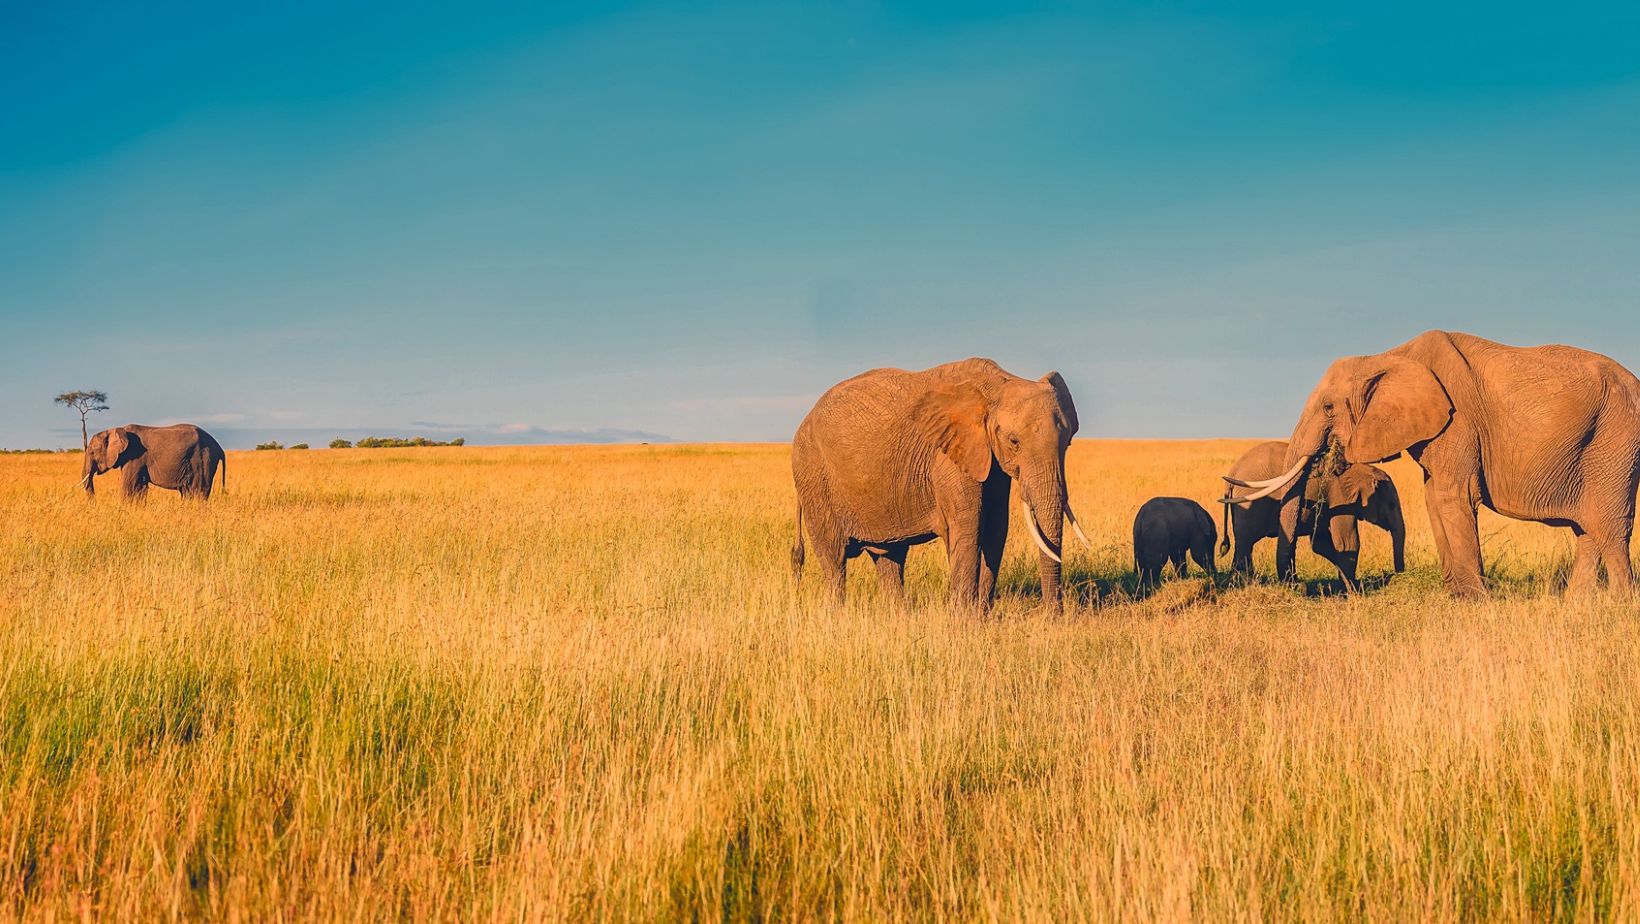 A family holiday in East Africa?